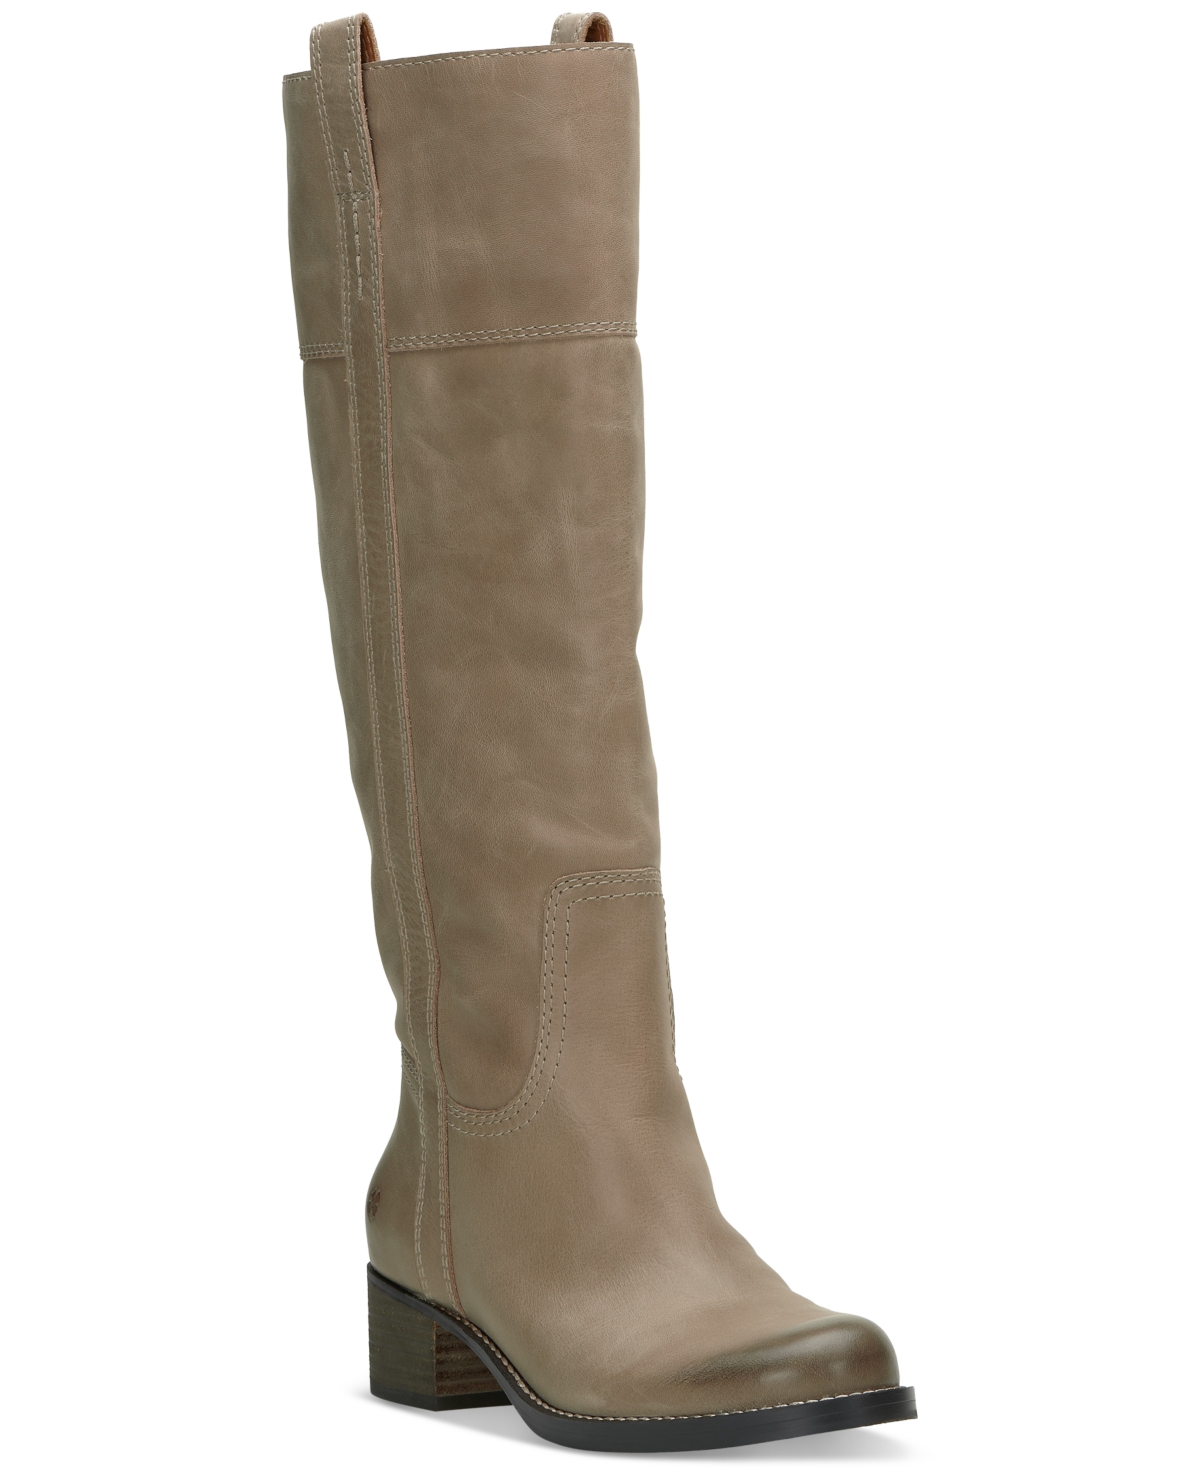 Women's Hybiscus Knee-High Riding Boots - Silver Cloud Leather